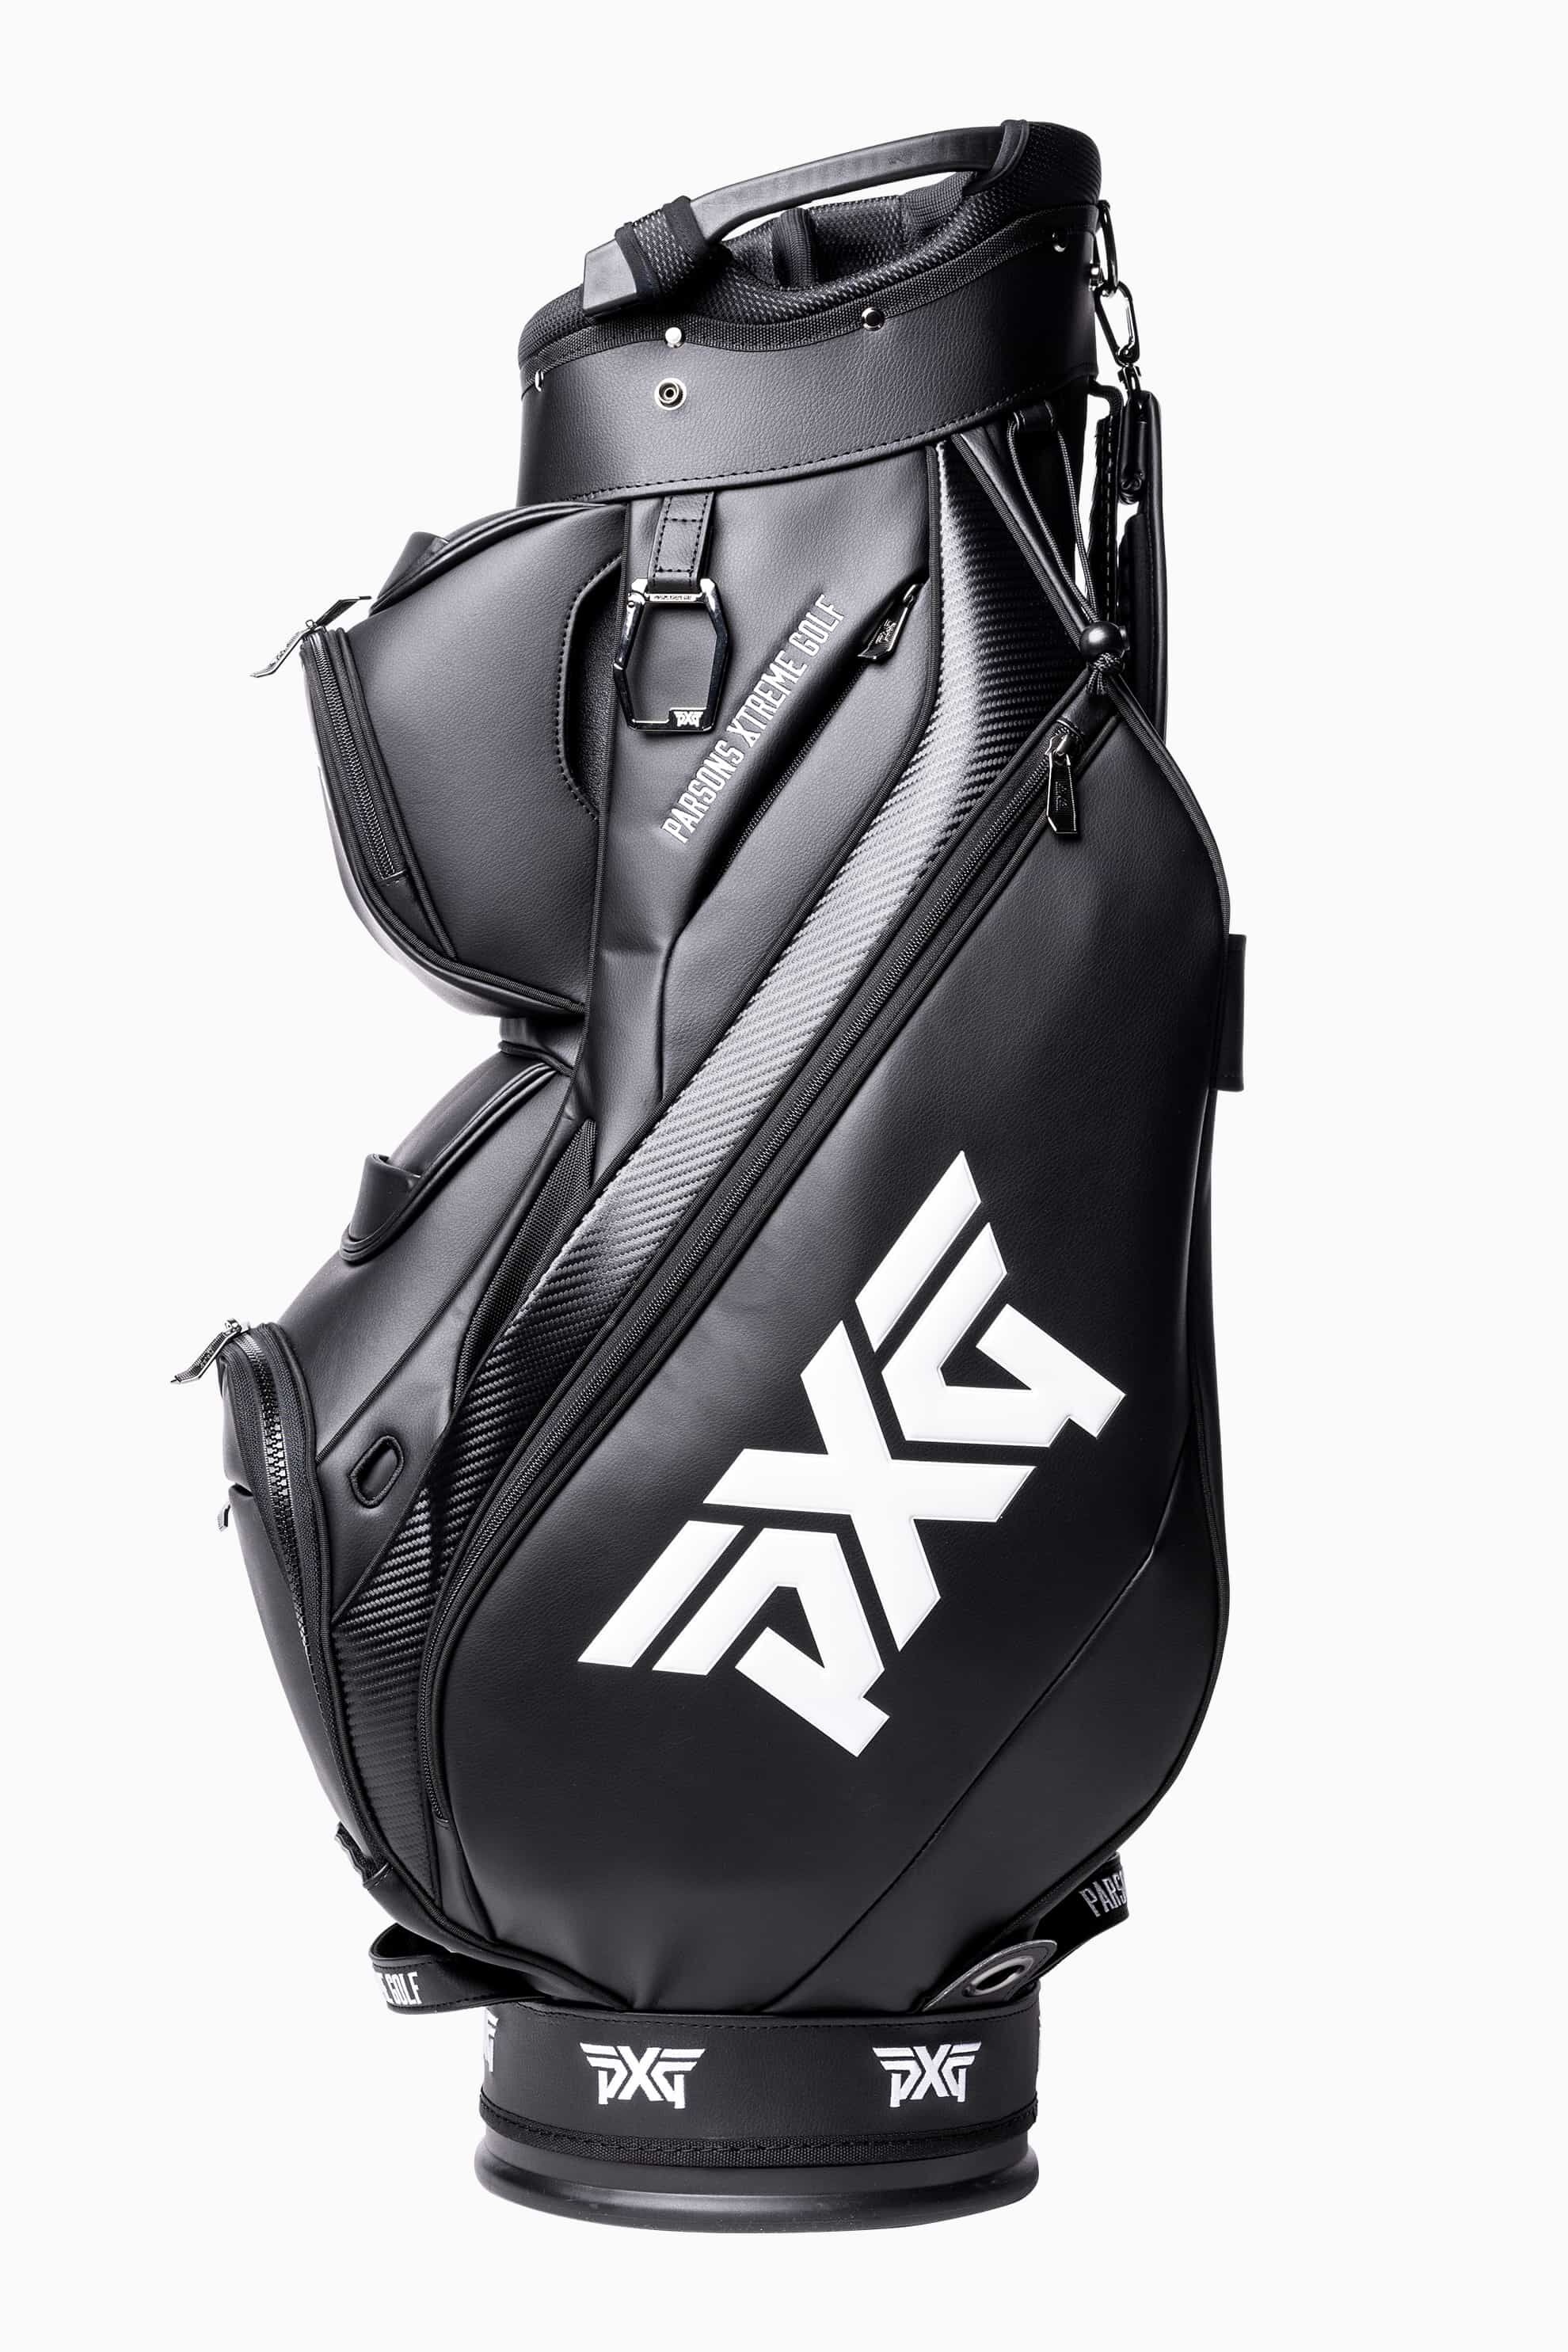 The DOS And DON'TS For Picking Up Your Golf Bag